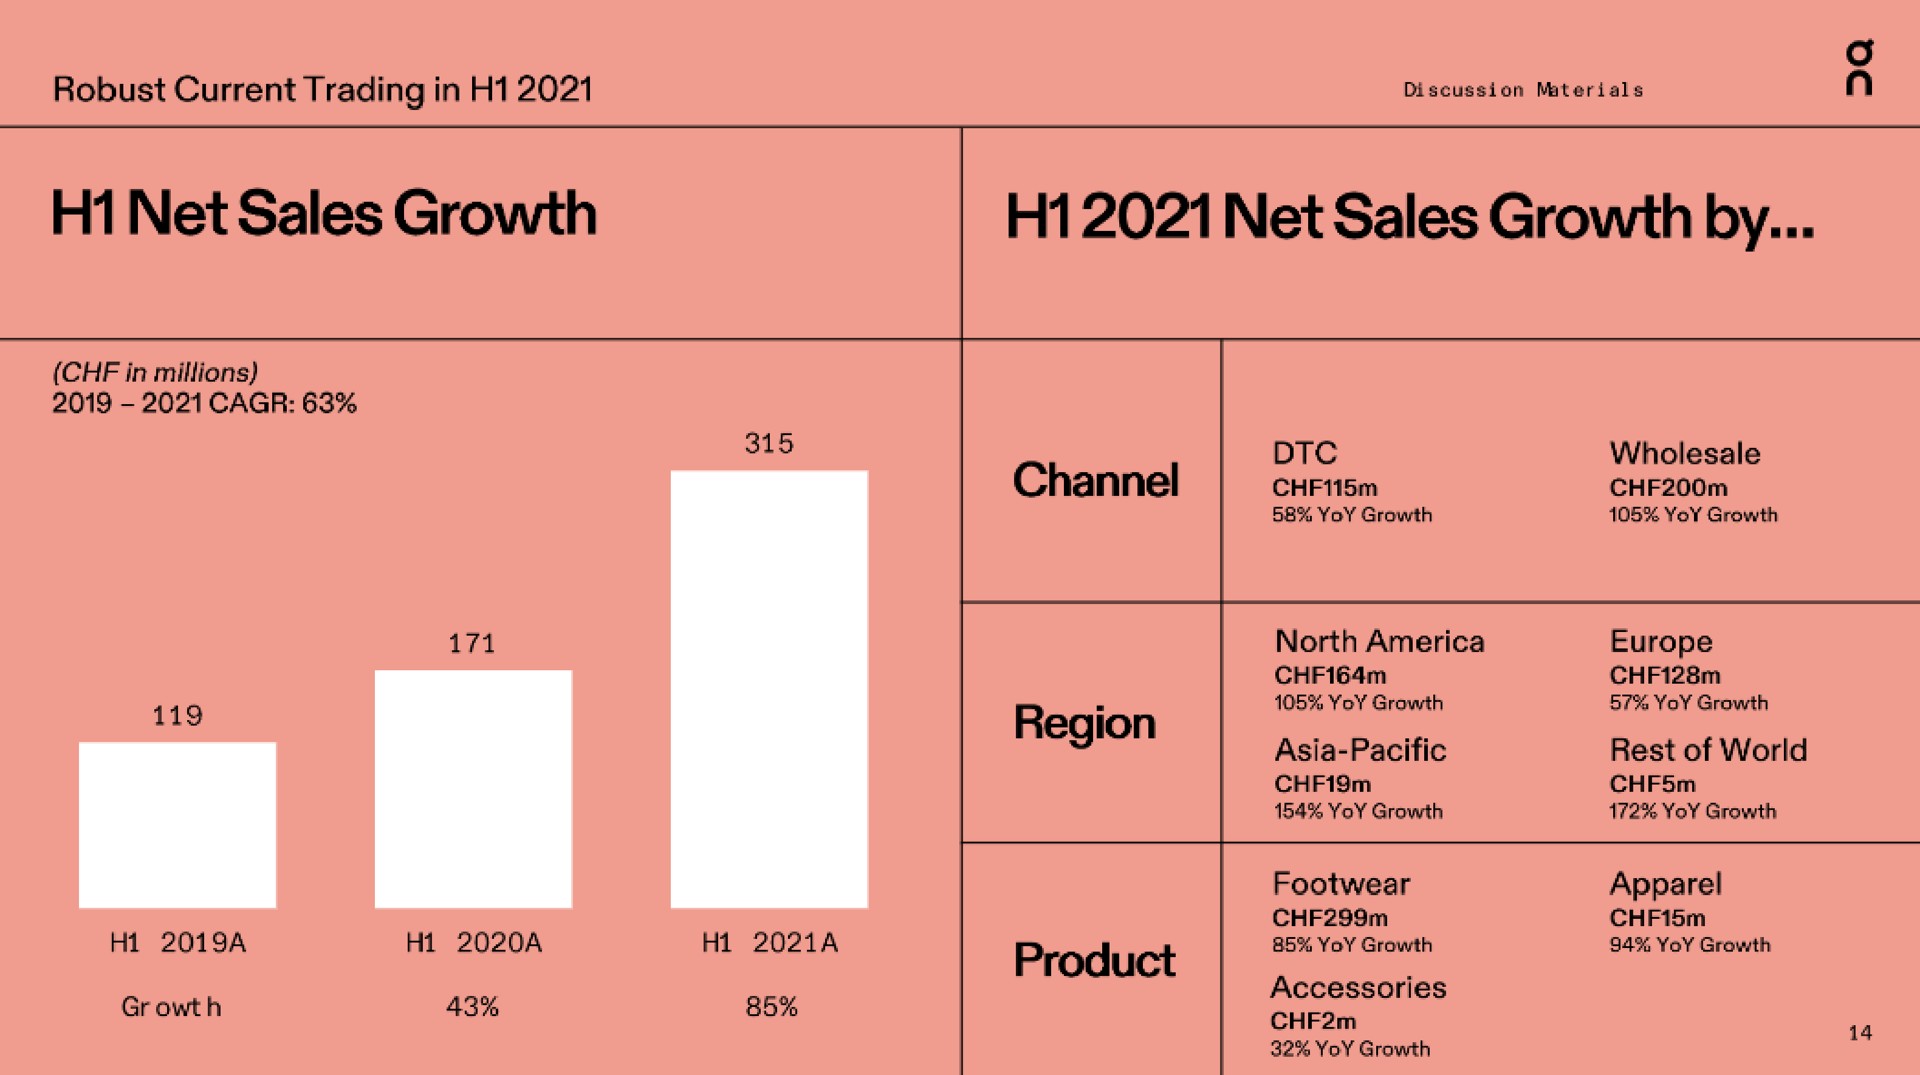 robust current trading in net sales growth net sales growth by channel region product | On Holding